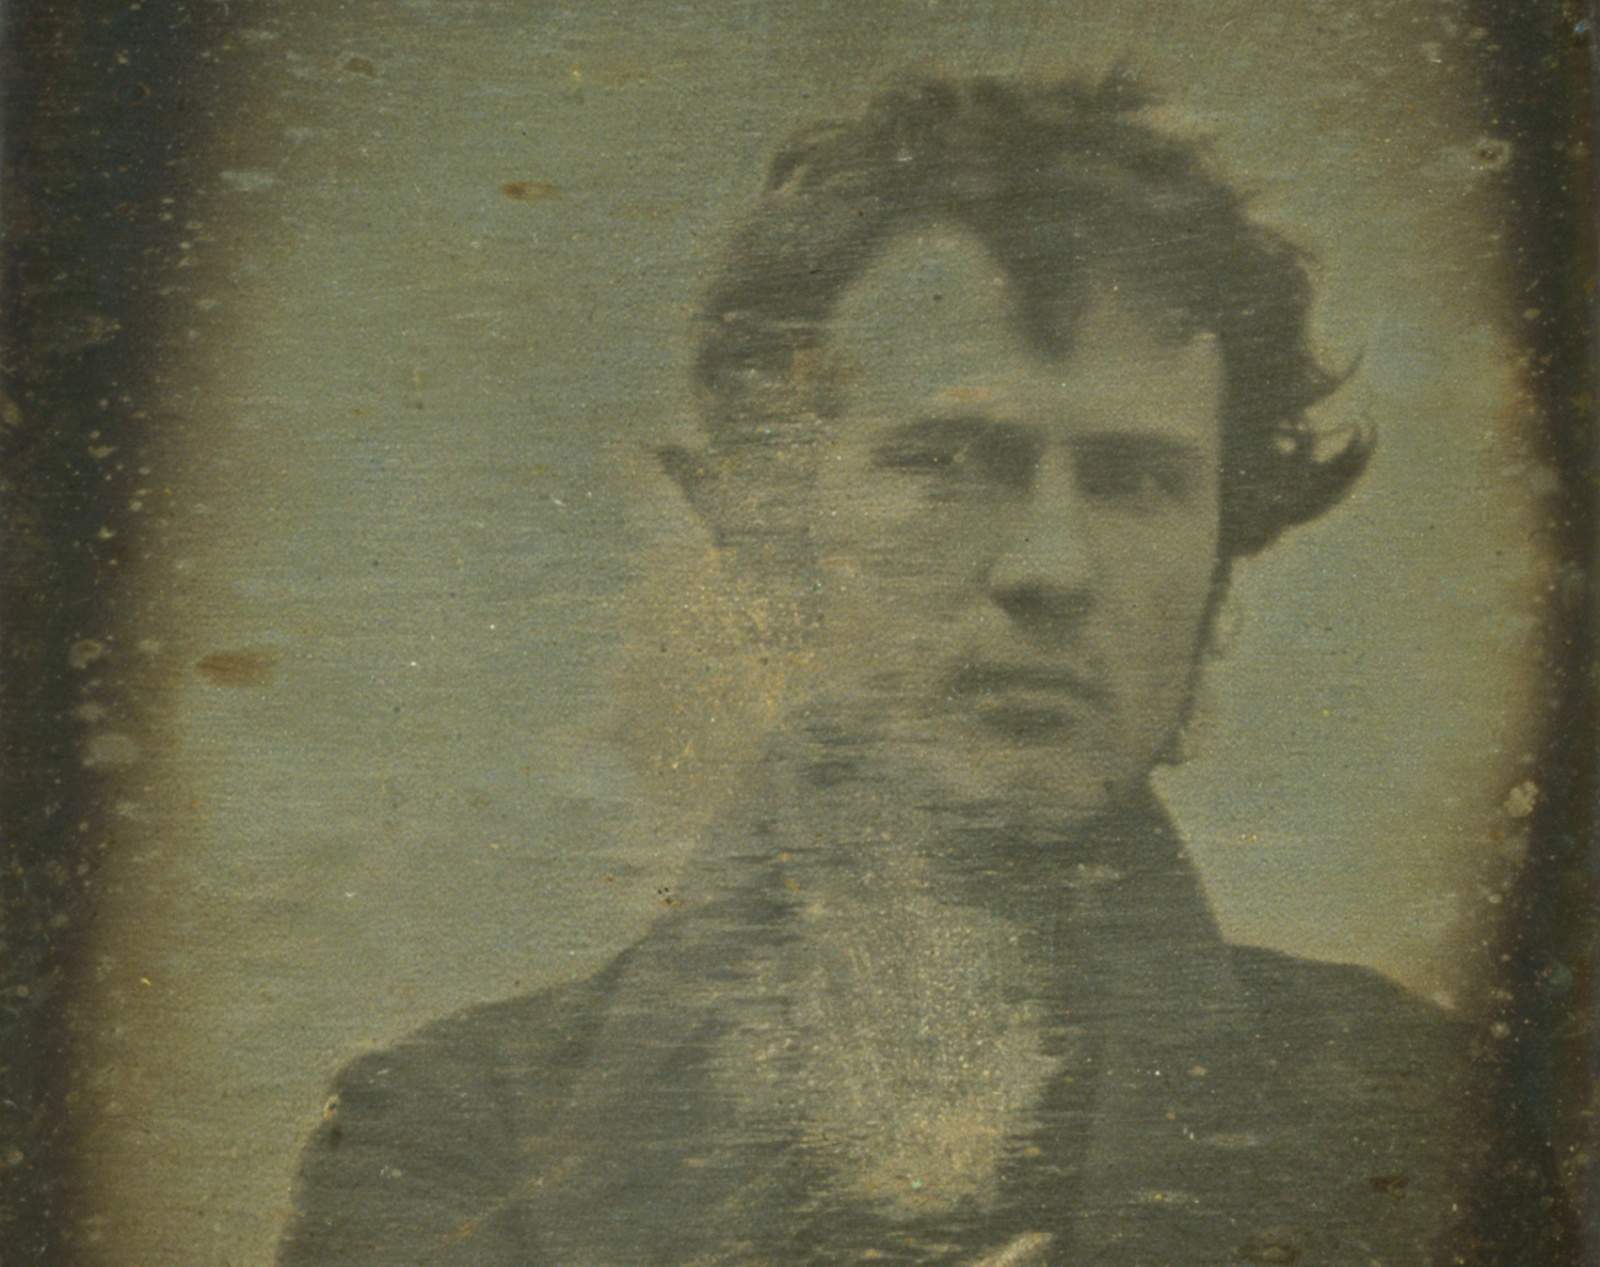 Robert Cornelius made photography history with the first known self-portrait taken in 1839.